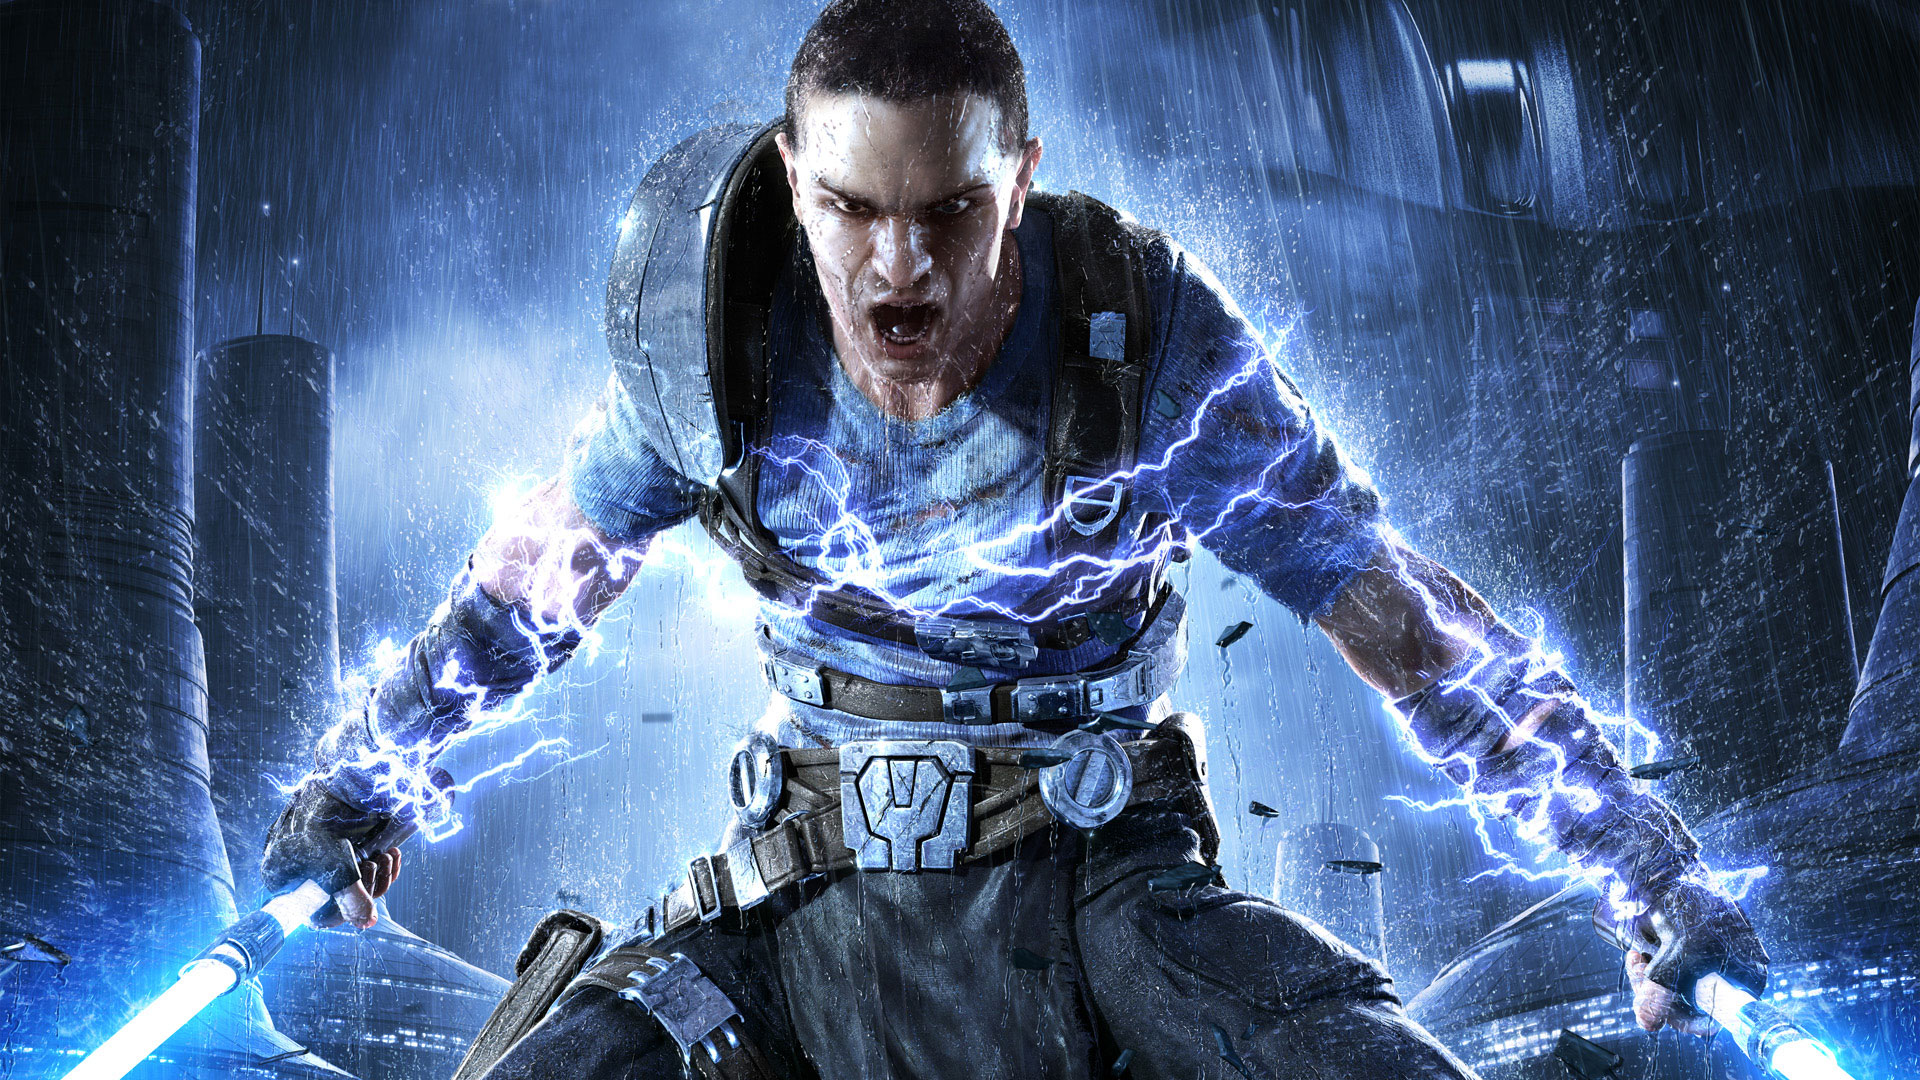 The Force Unleashed 2 1080p Wallpaper   Star Wars Force Unleashed